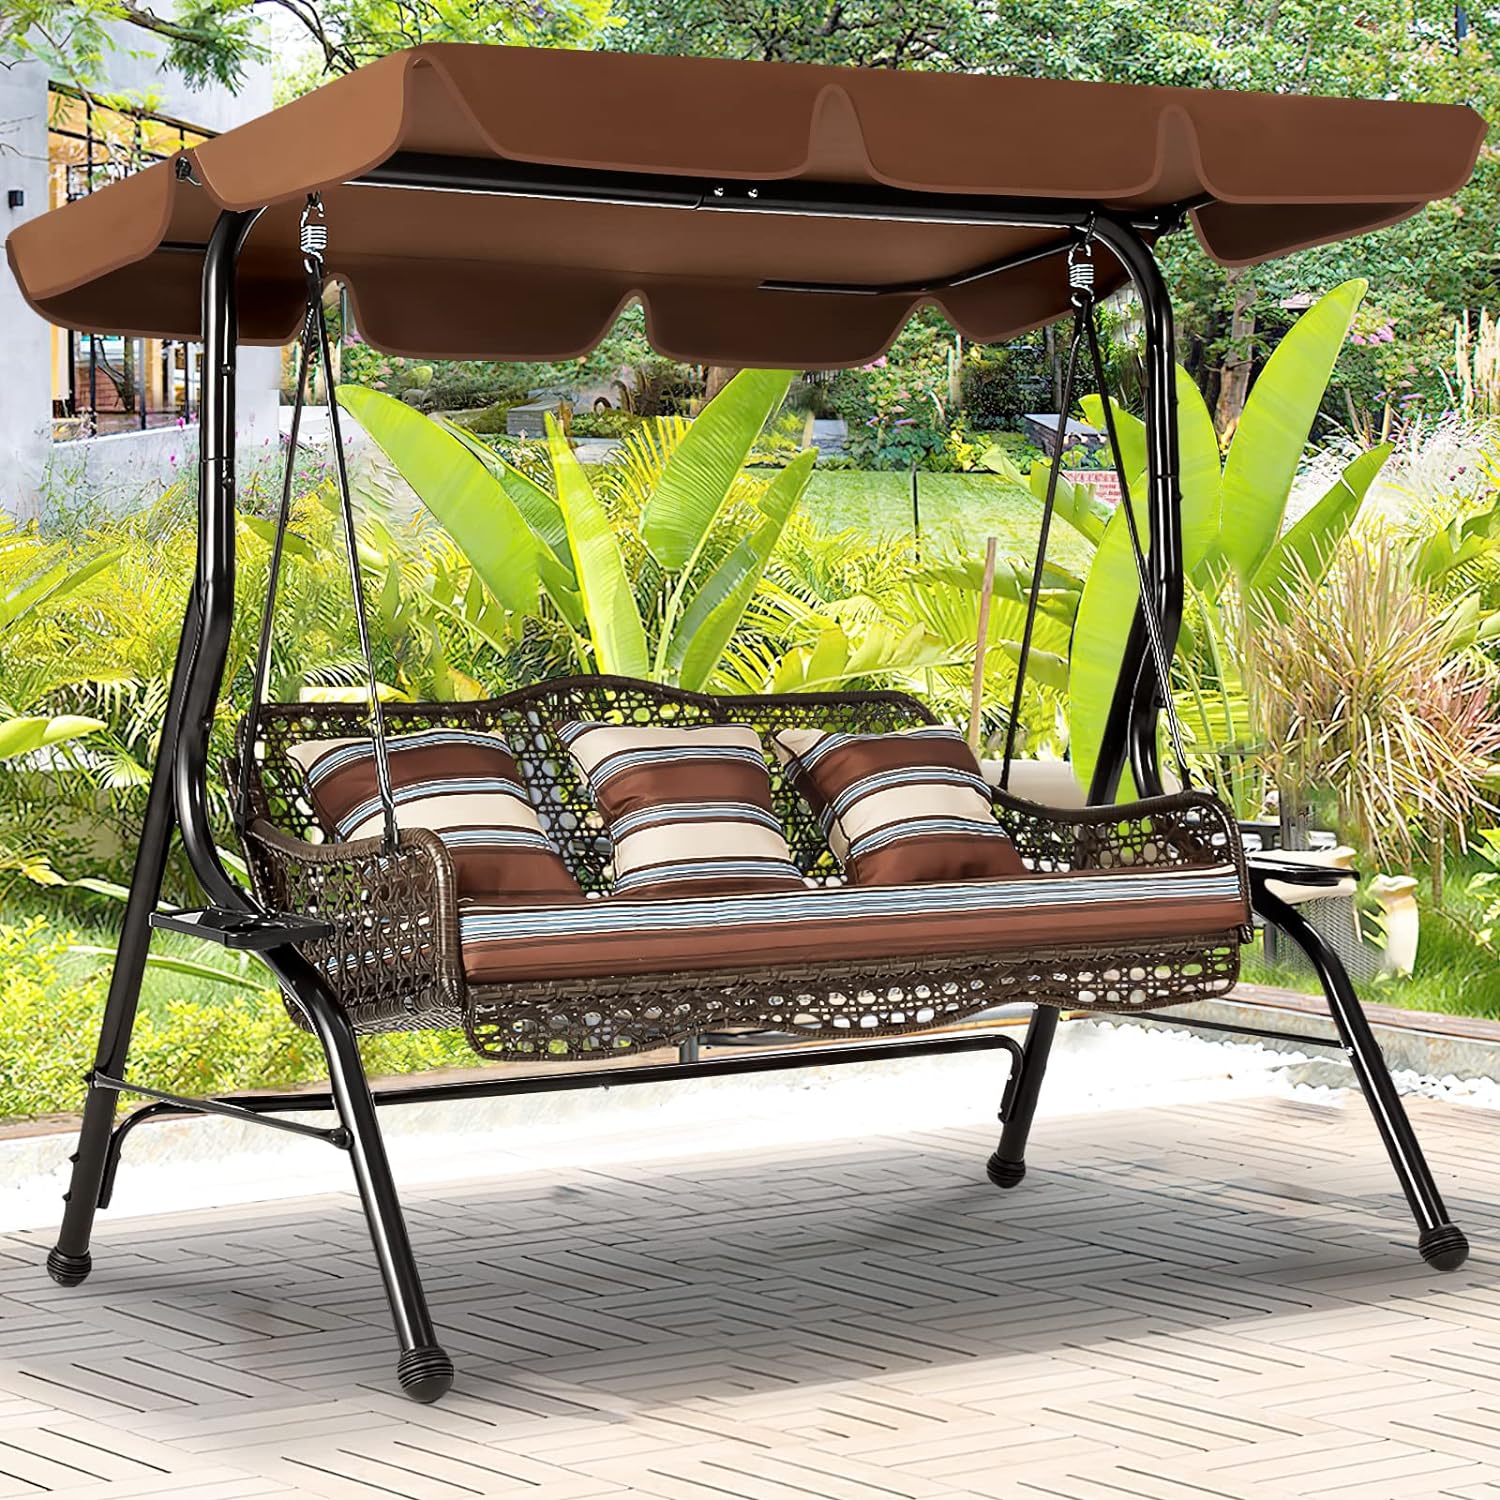 AECOJOY 3-Seat Outdoor Patio Swing Chair, Large Converting Canopy Porch Swing Glider, Hammock Lounge Chair for Porch, Rattan Wicker Steel Frame Cushion & Pillow, Brown